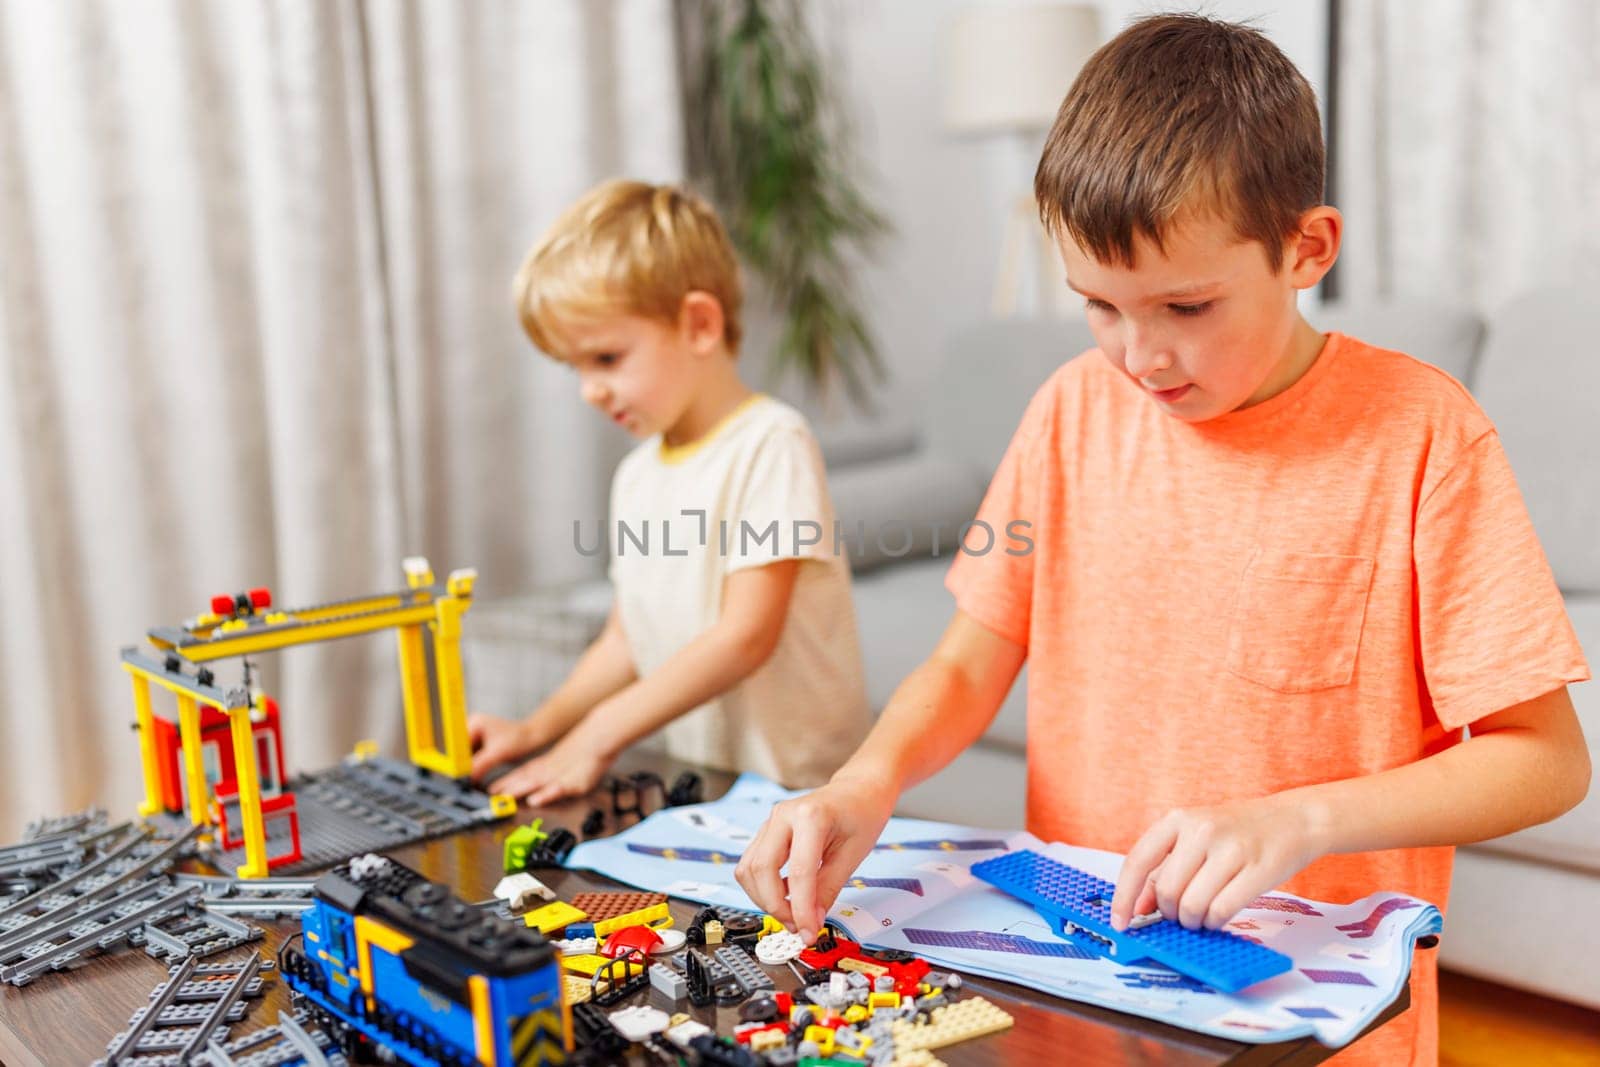 Two children playing and building with colorful plastic bricks at the table by andreyz